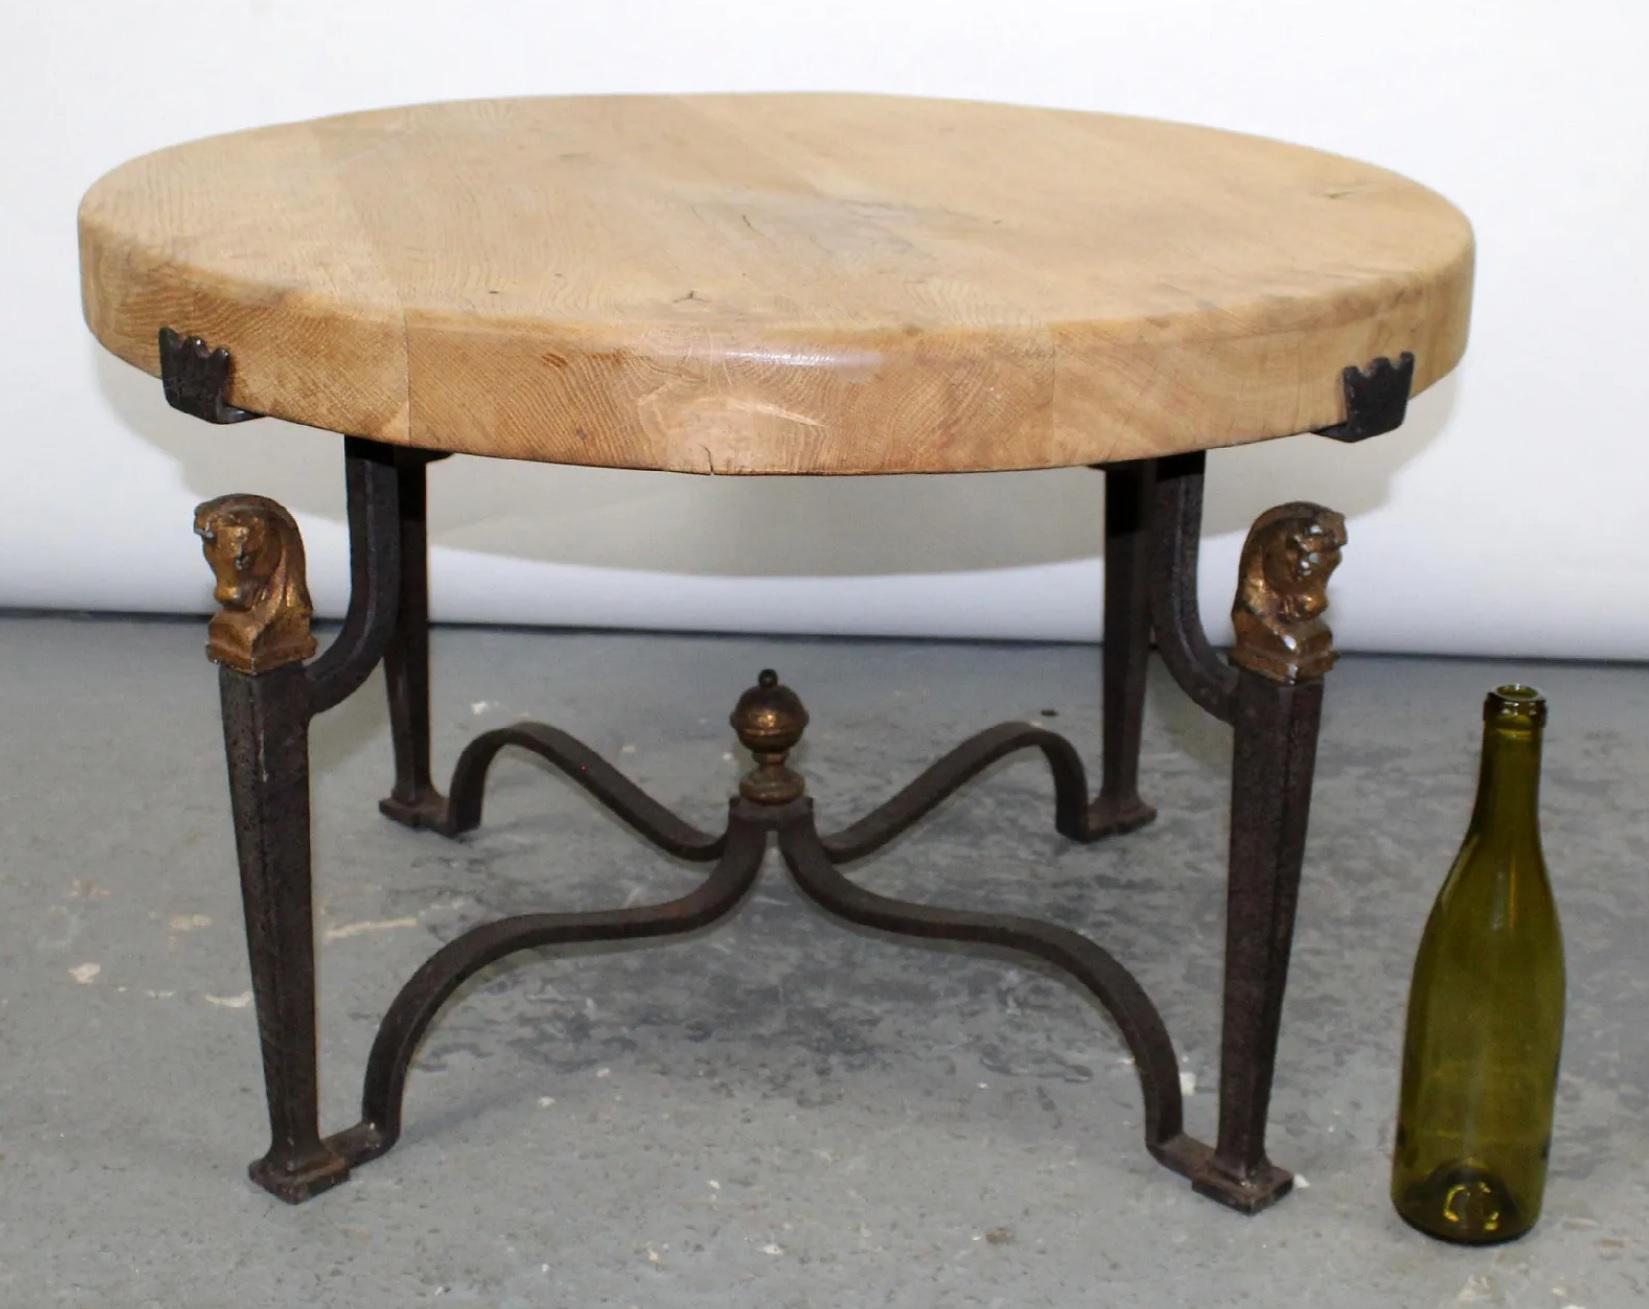 Midcentury French cocktail/coffee table with wrought iron base and natural finish oak top, in the style of Jean-Charles Moreux. The wrought iron base features gilt horse head capitals resembling chess knight pieces.